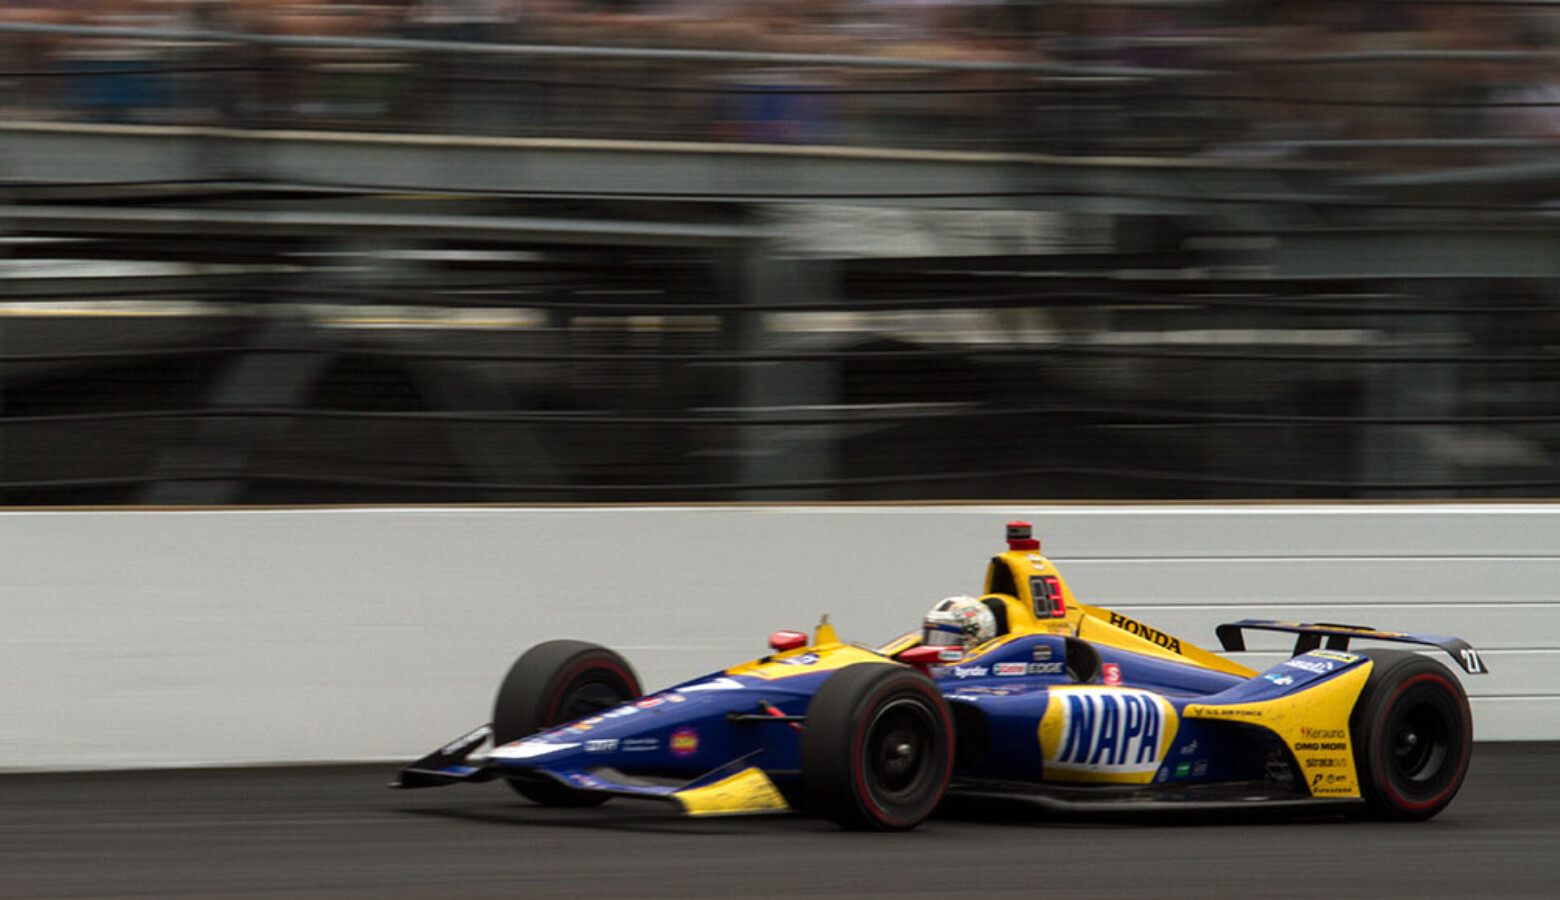 Alexander Rossi finished second in the 103rd running of the Indianapolis 500 on Sunday, May 26, 2019. (FILE PHOTO: Doug Jaggers/WFYI News)